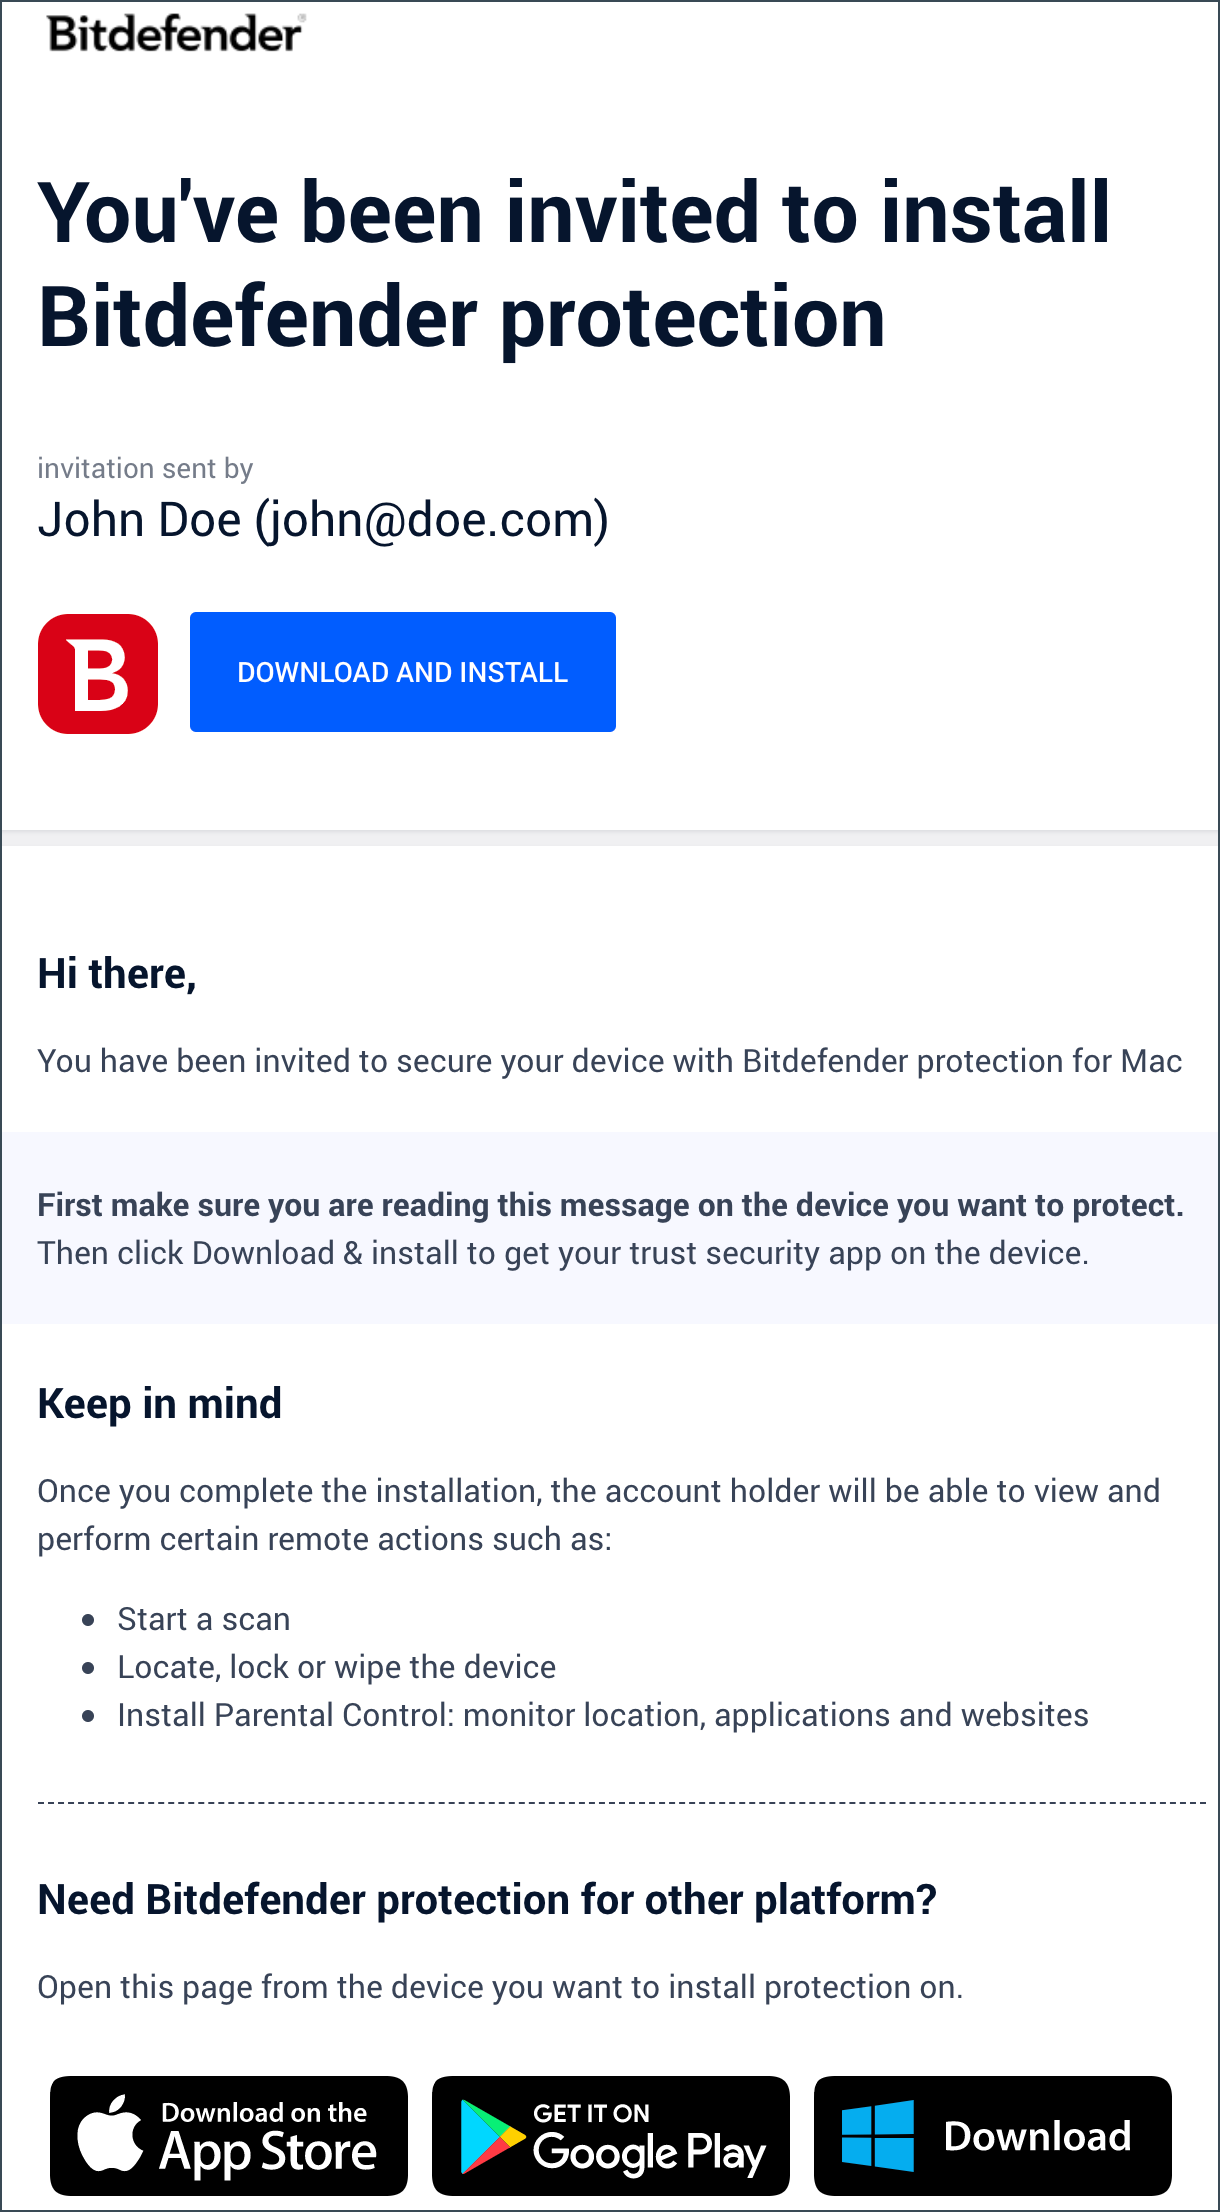 E-mail invitation to install Bitdefender on another device